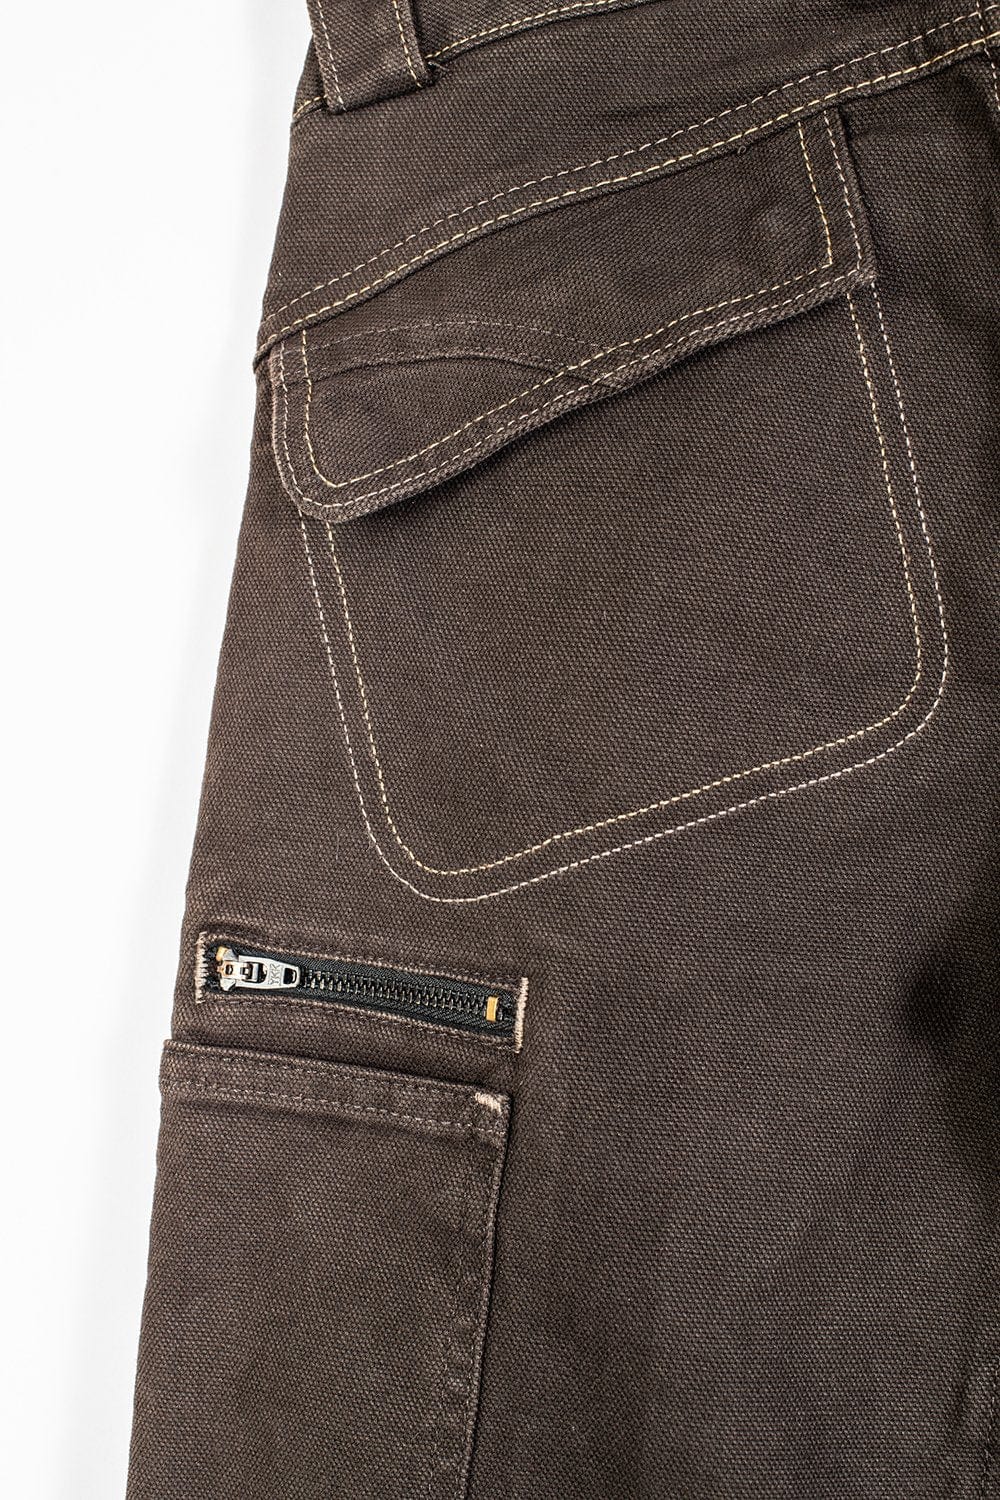 Day Construct in Brown Canvas Work Pants Dovetail Workwear